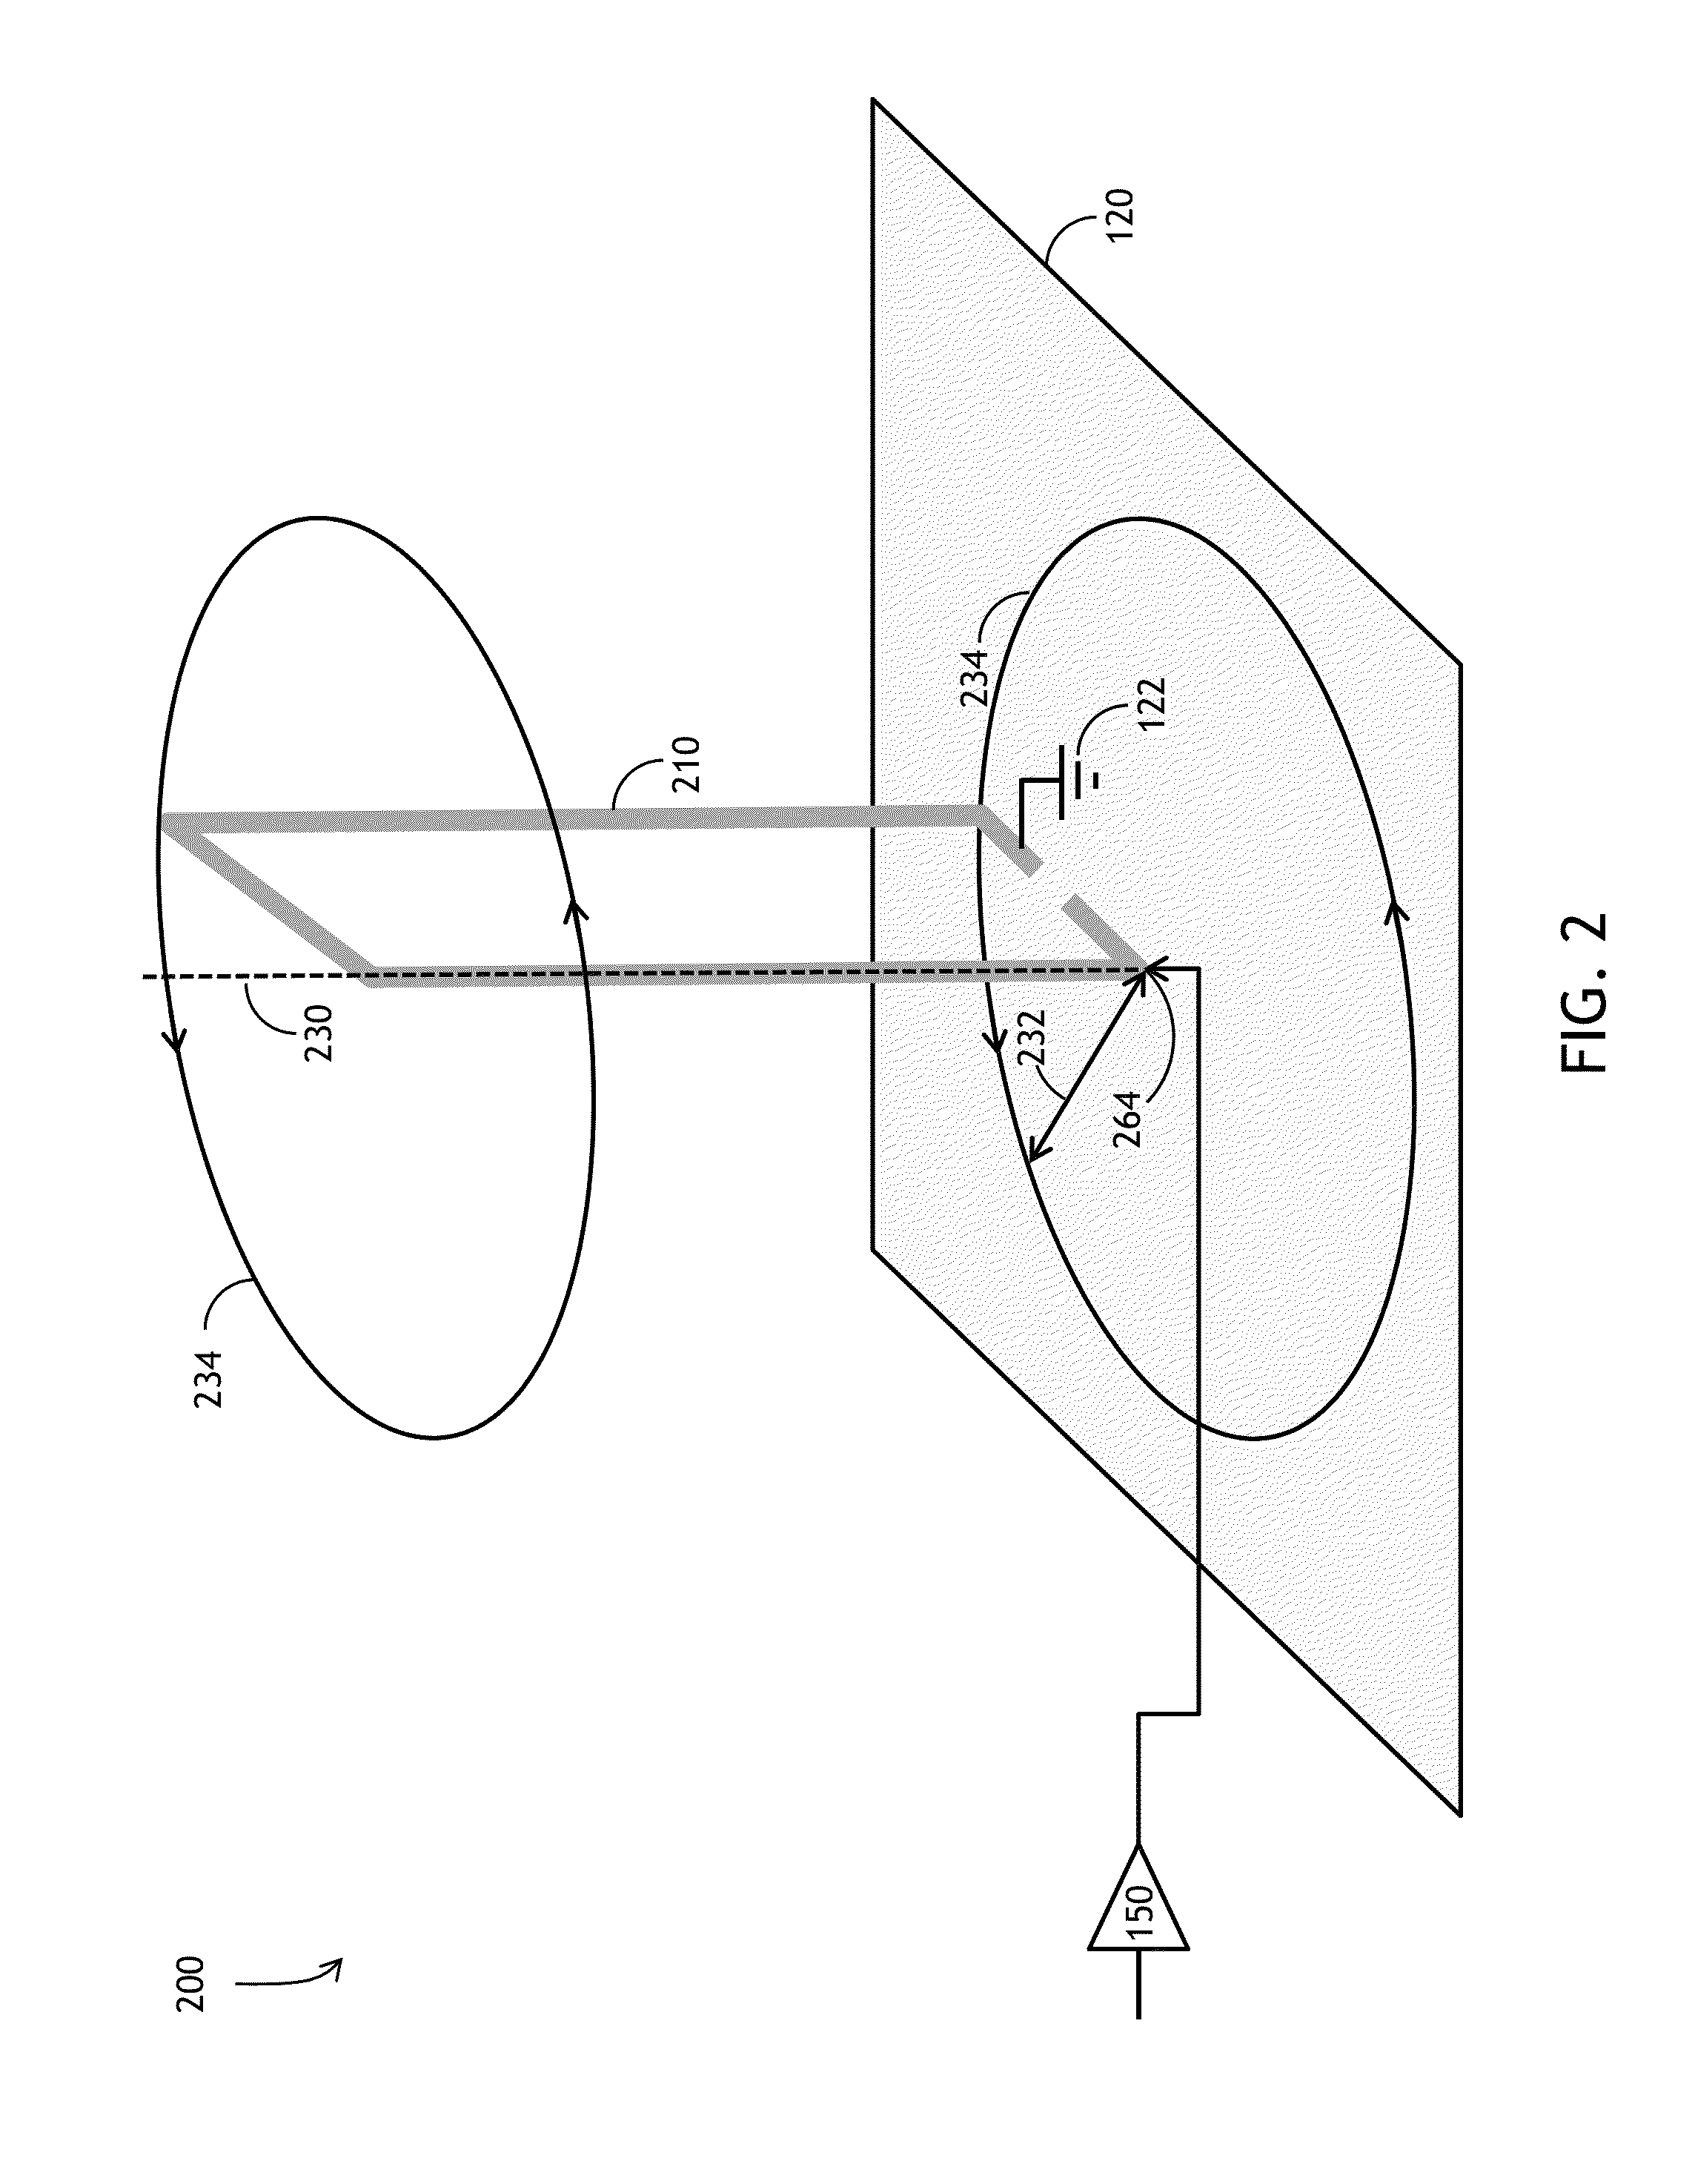 Wideband voltage-driven electrically-small loop antenna system and related method